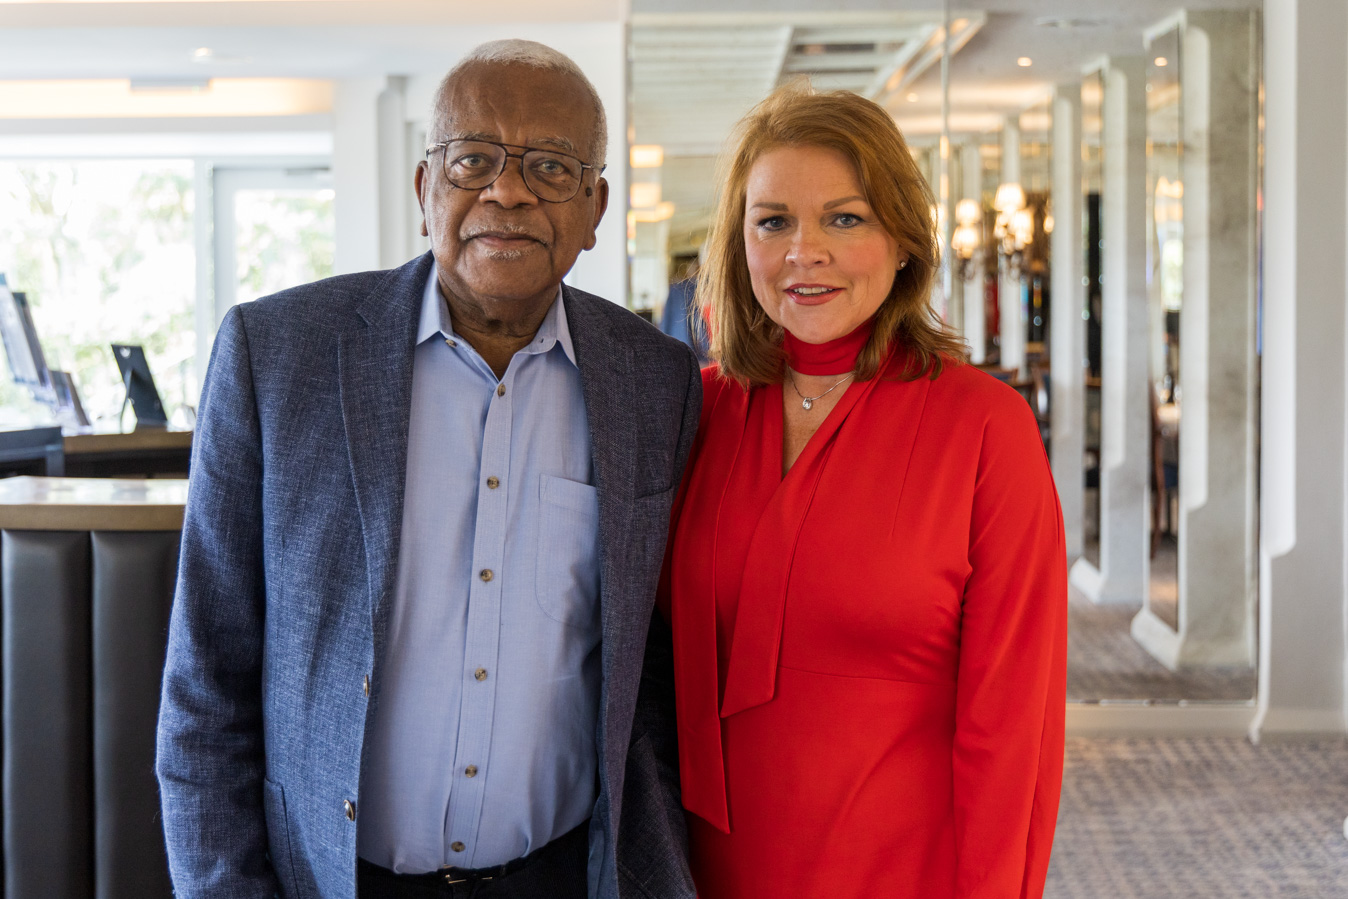 The winners of TVFBNI auction prize enjoy lunch with Sir Trevor McDonald and Linda Duberley at The Petersham 